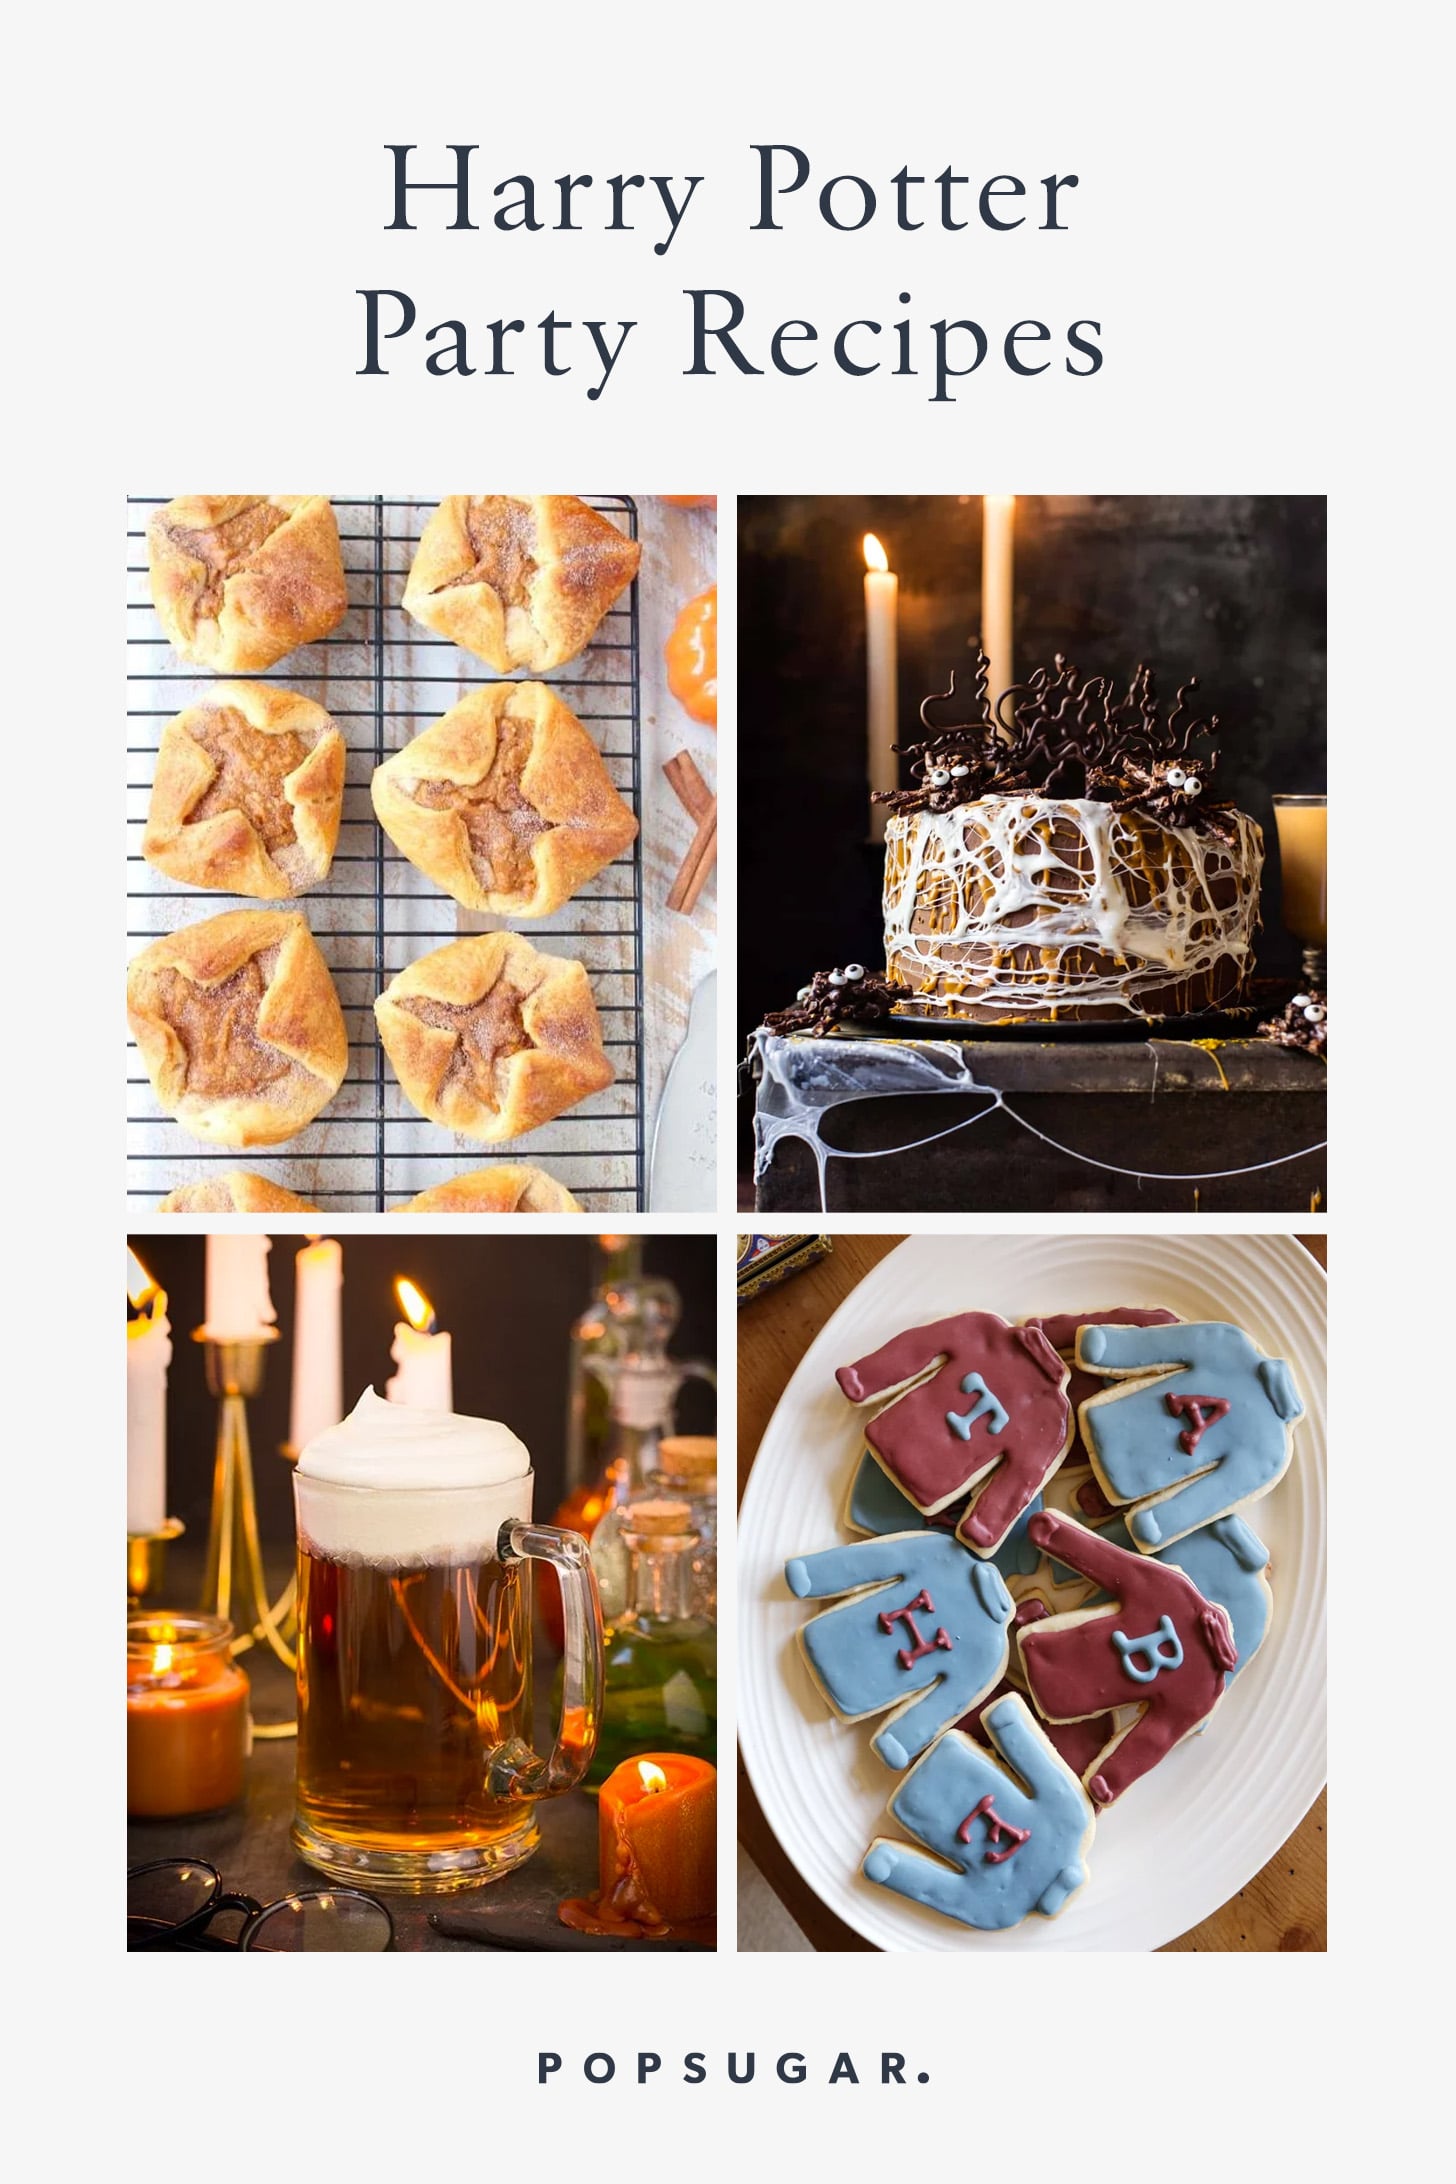 Fun Harry Potter Party Food - Golden Snitch Oranges - Eats Amazing.